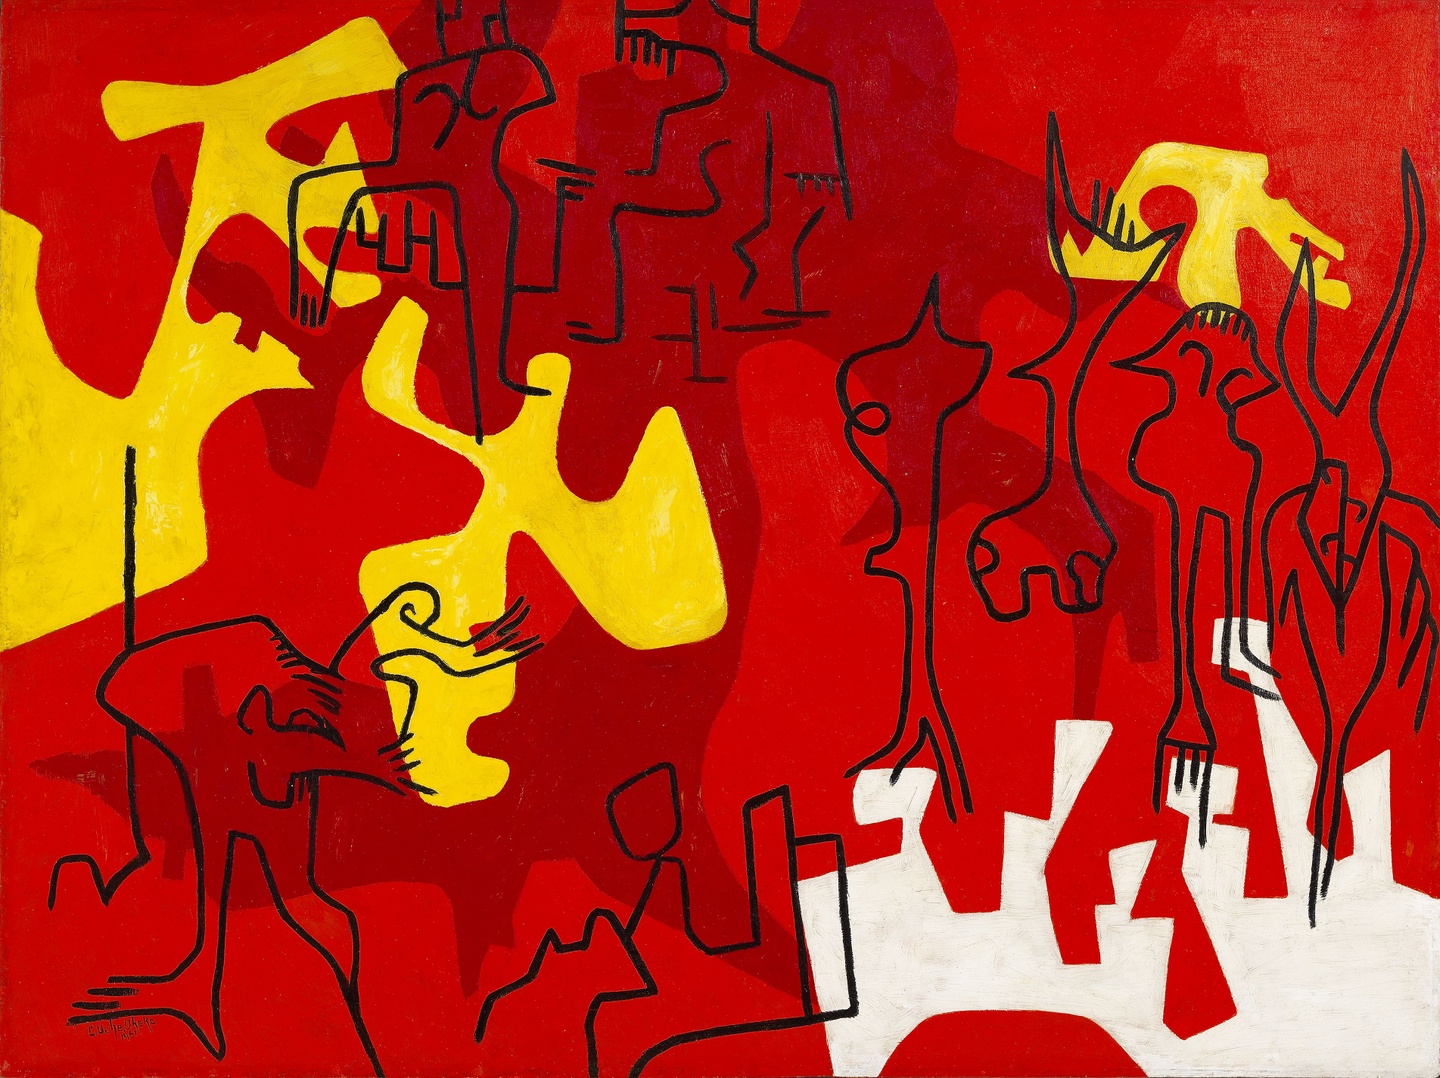 An abstract painting of forms in red with black outlines, yellow, and white